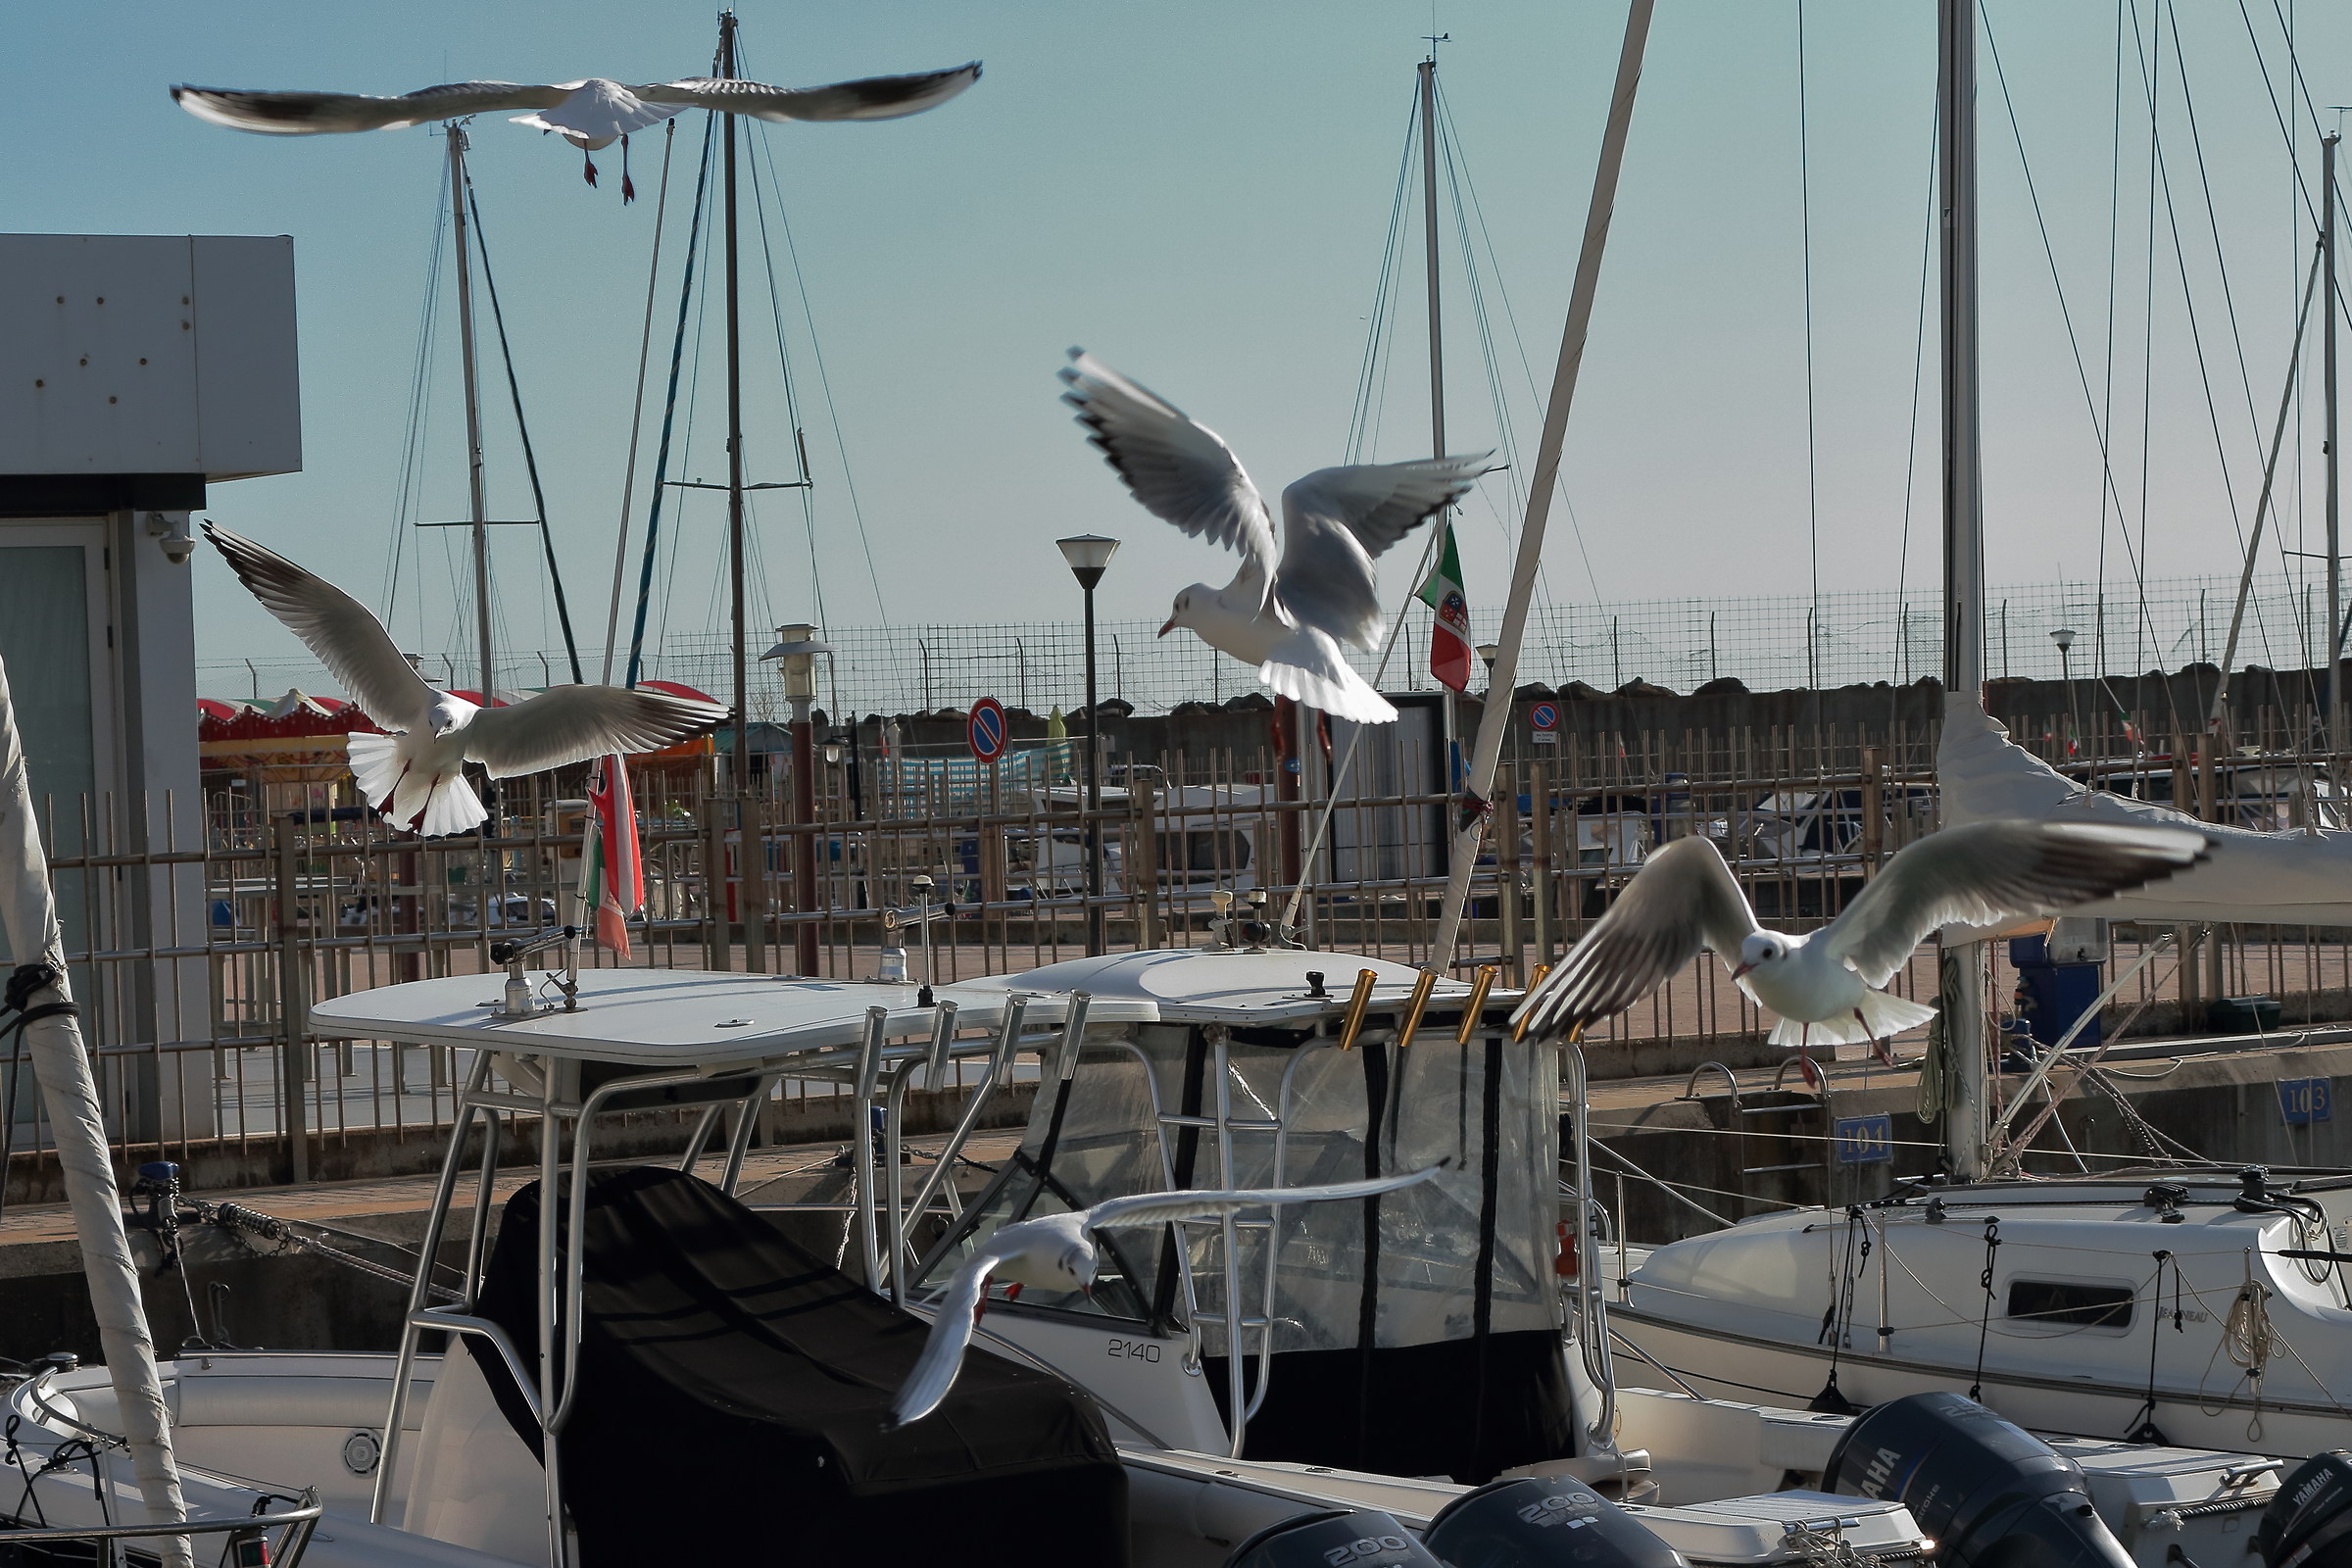 Seagulls at the Port 1...